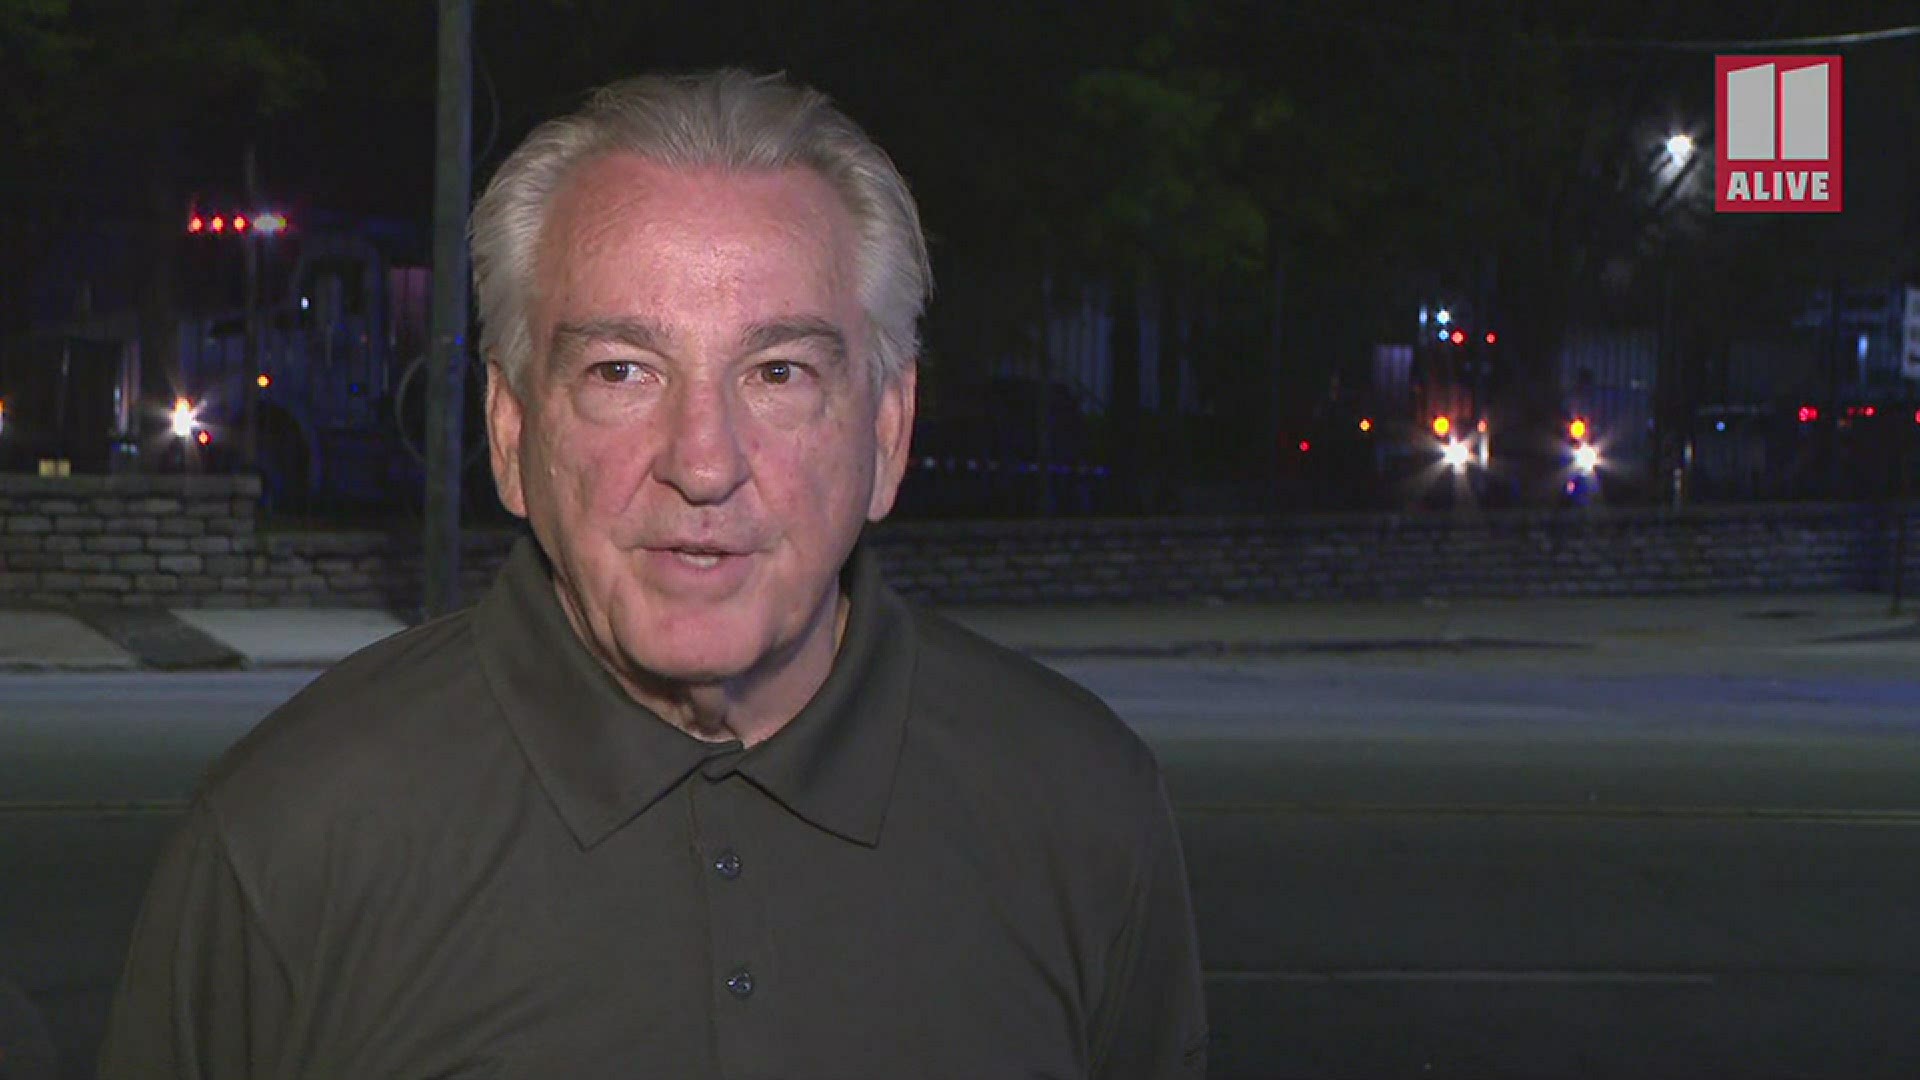 MVP Studios founder J.B. Vick spoke to 11Alive at the scene after the crane's collapse.